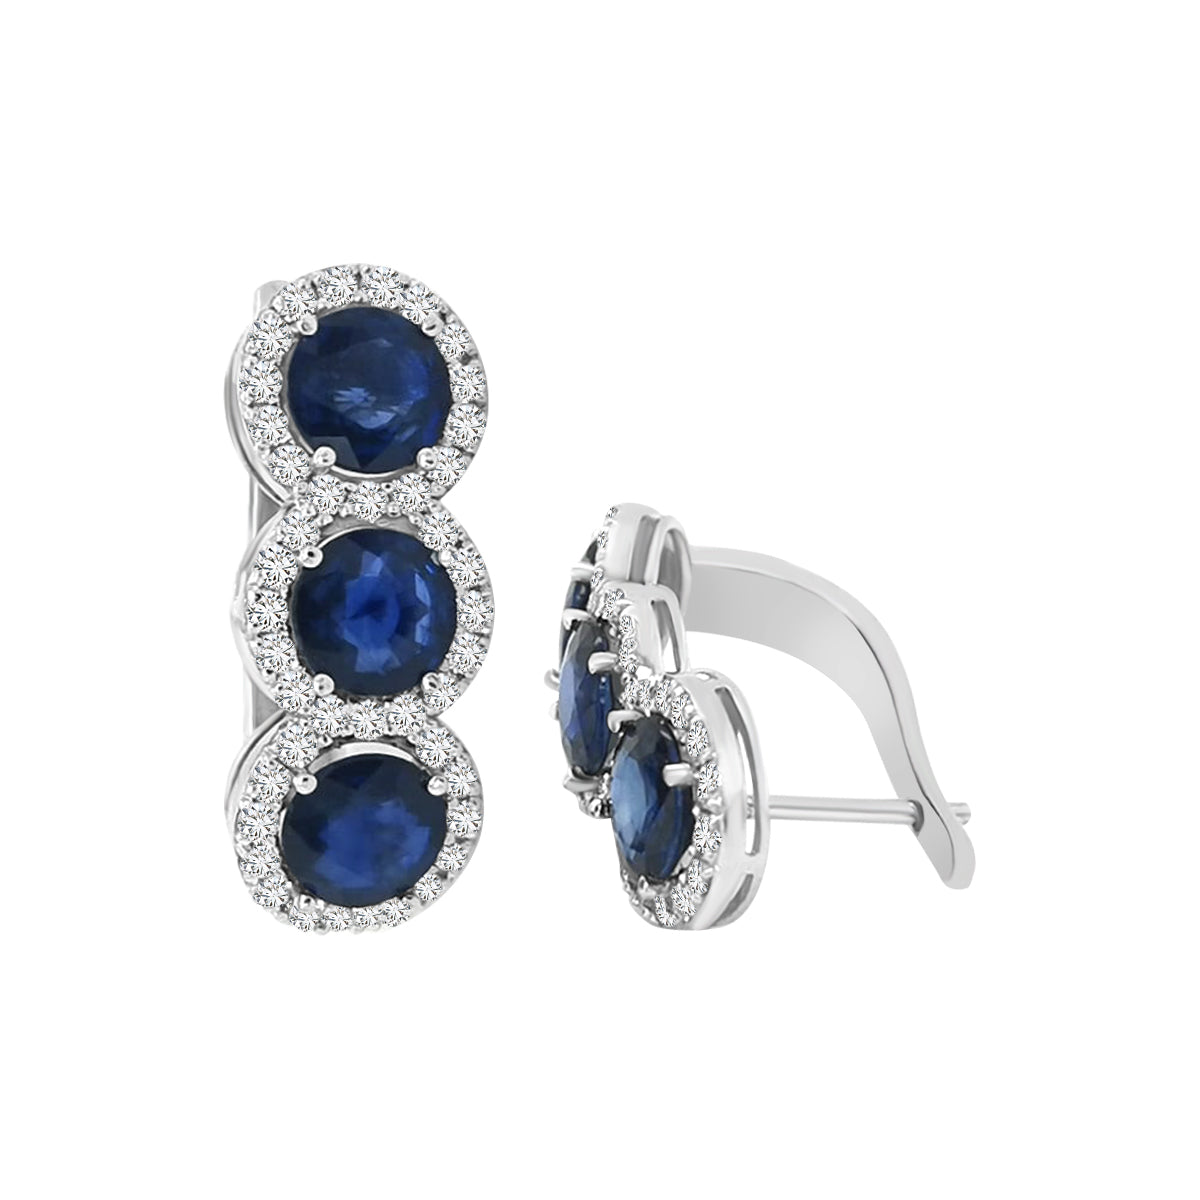 Blue Sapphire And Diamond Earrings In 18k White Gold.